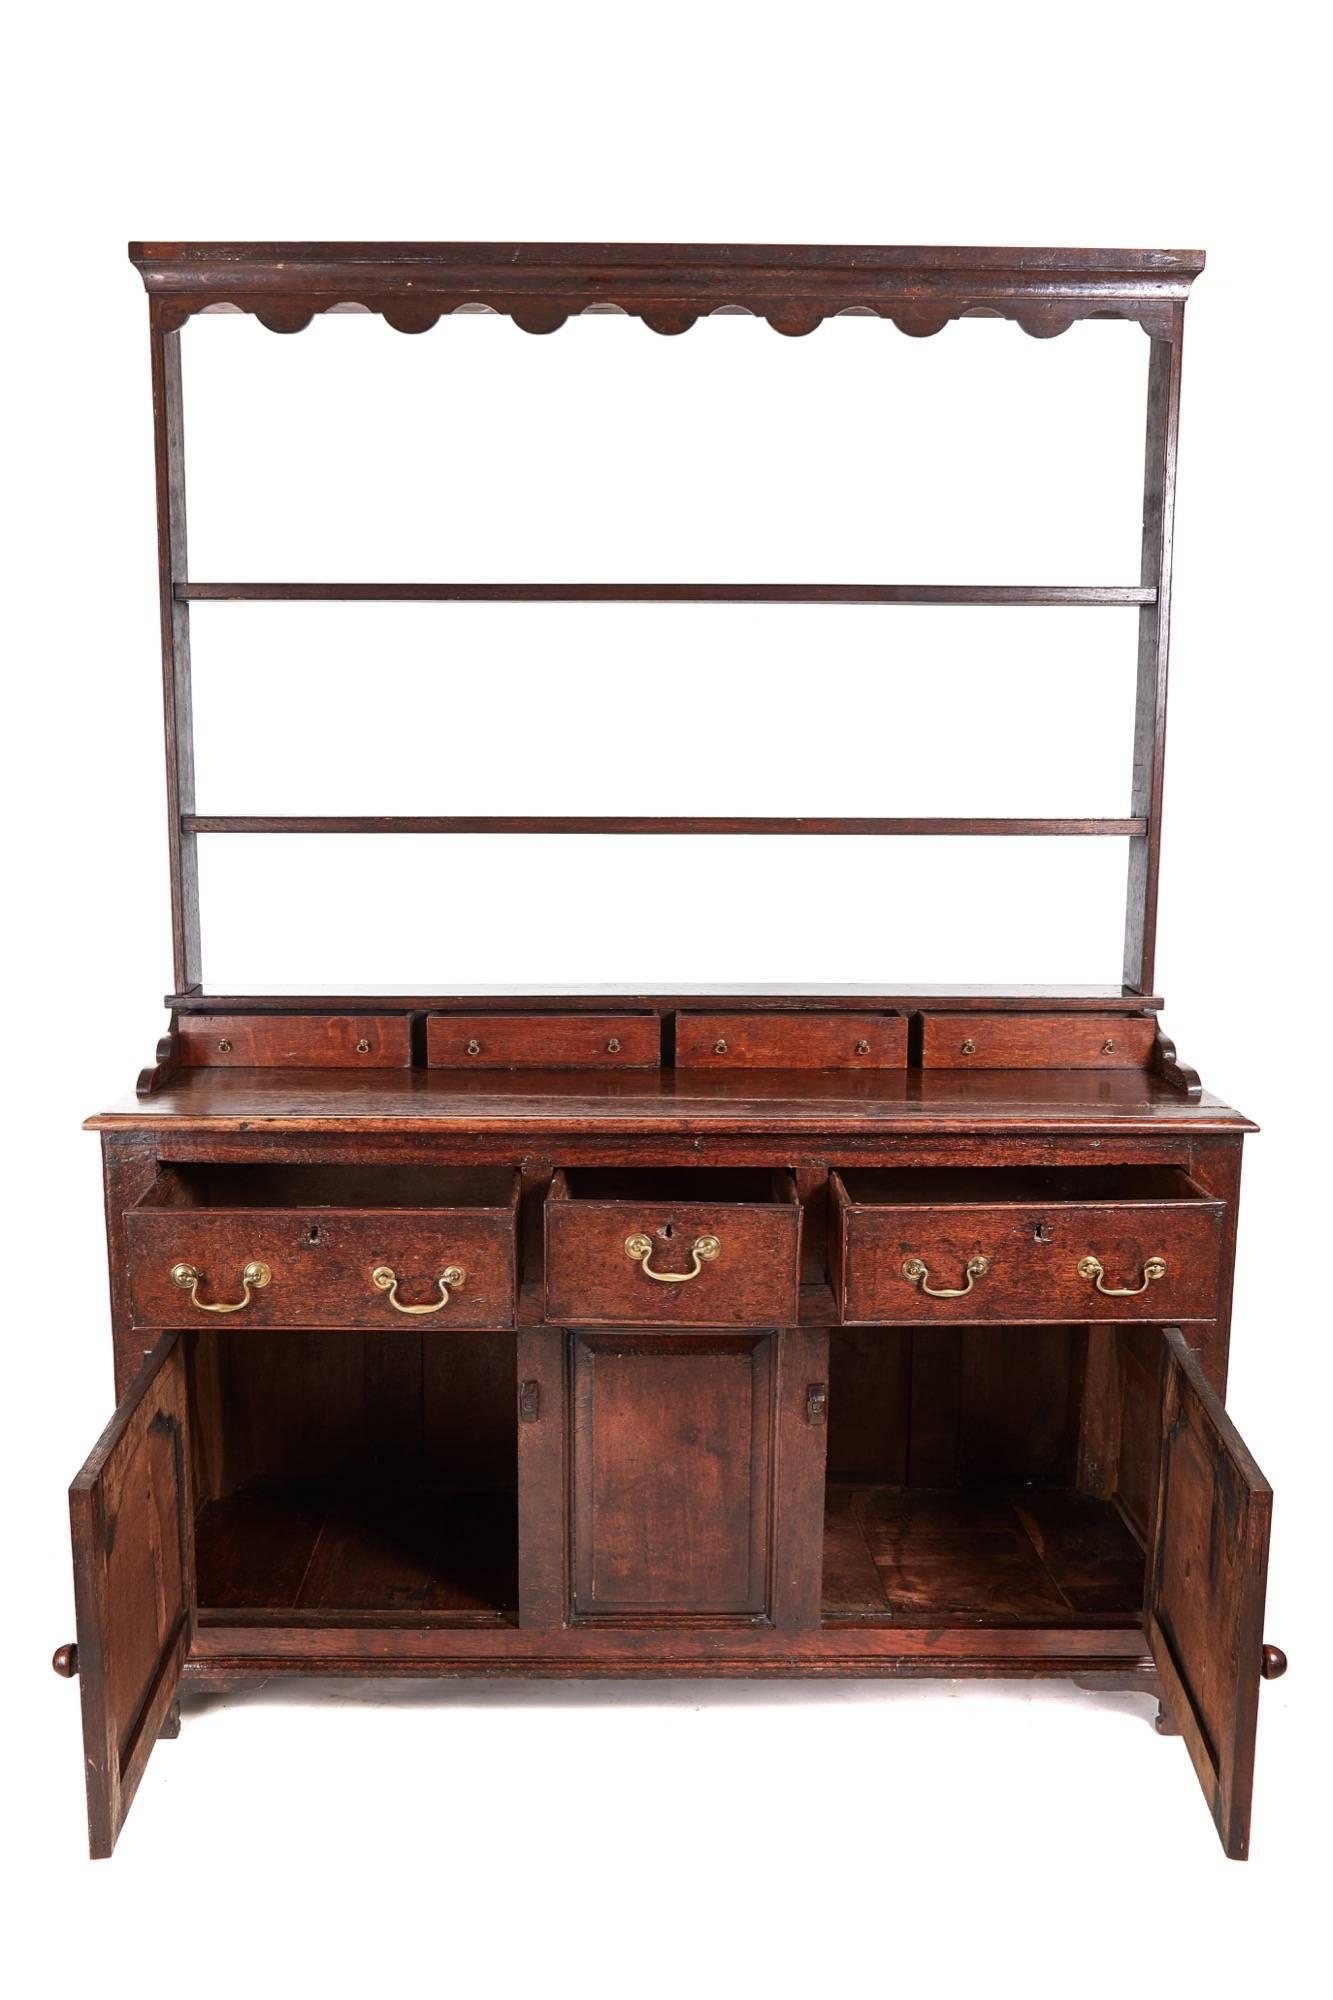 Early 18th century oak welsh dresser, with a swept ogee cornice, plate rack, and four drawers with original brass handles, the base with two cupboard doors, each with raised shaped panels, and a centre raised panel, three drawers with original brass